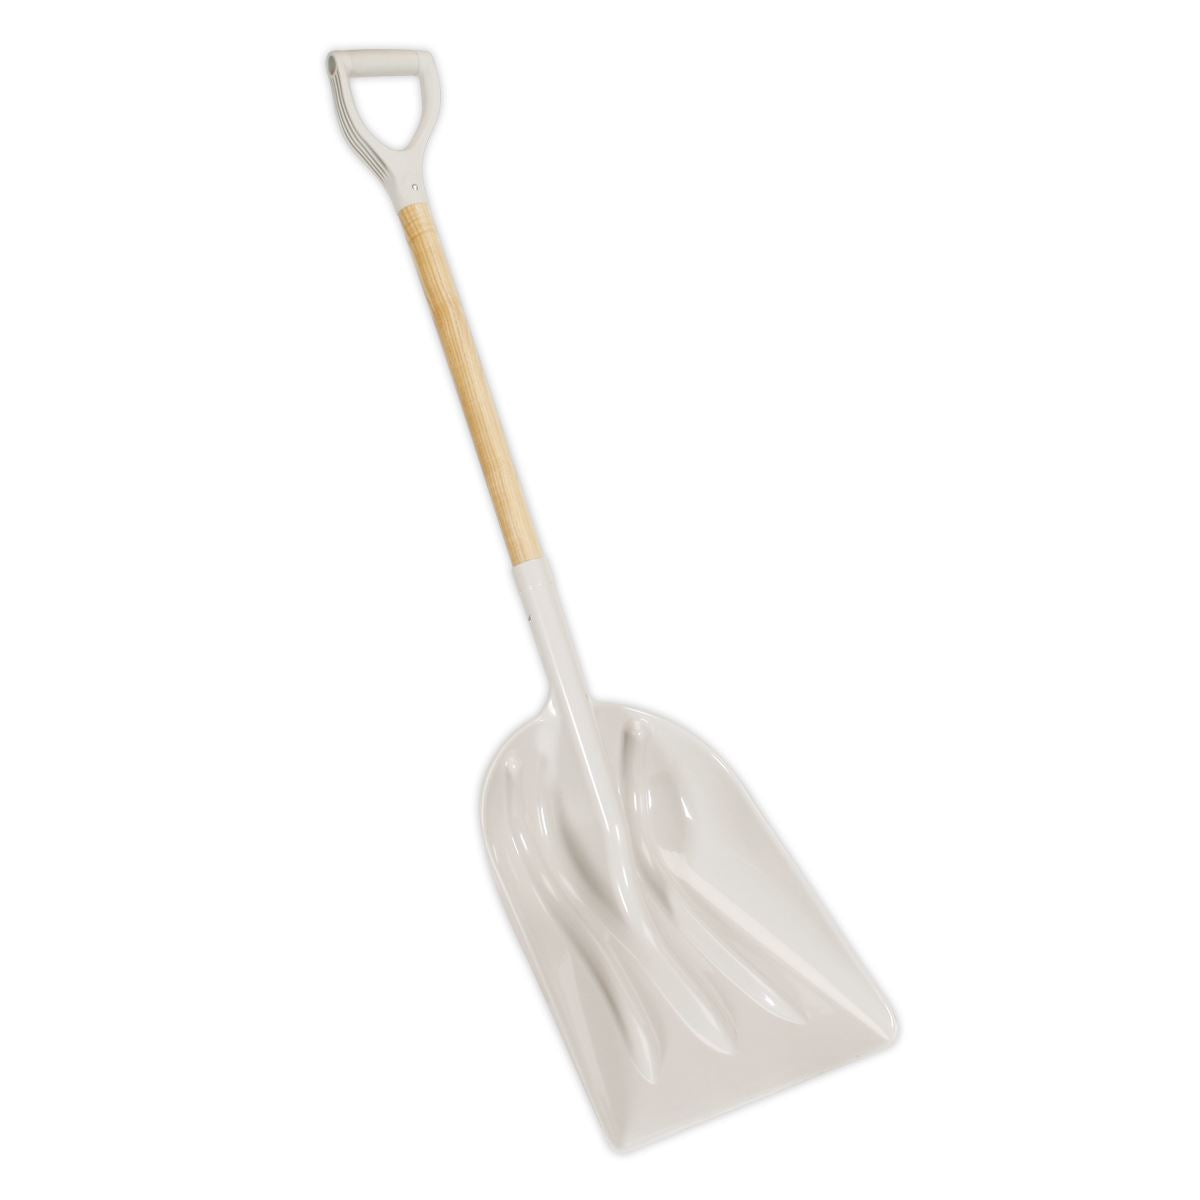 Sealey General-Purpose Shovel with 900mm Wooden Handle